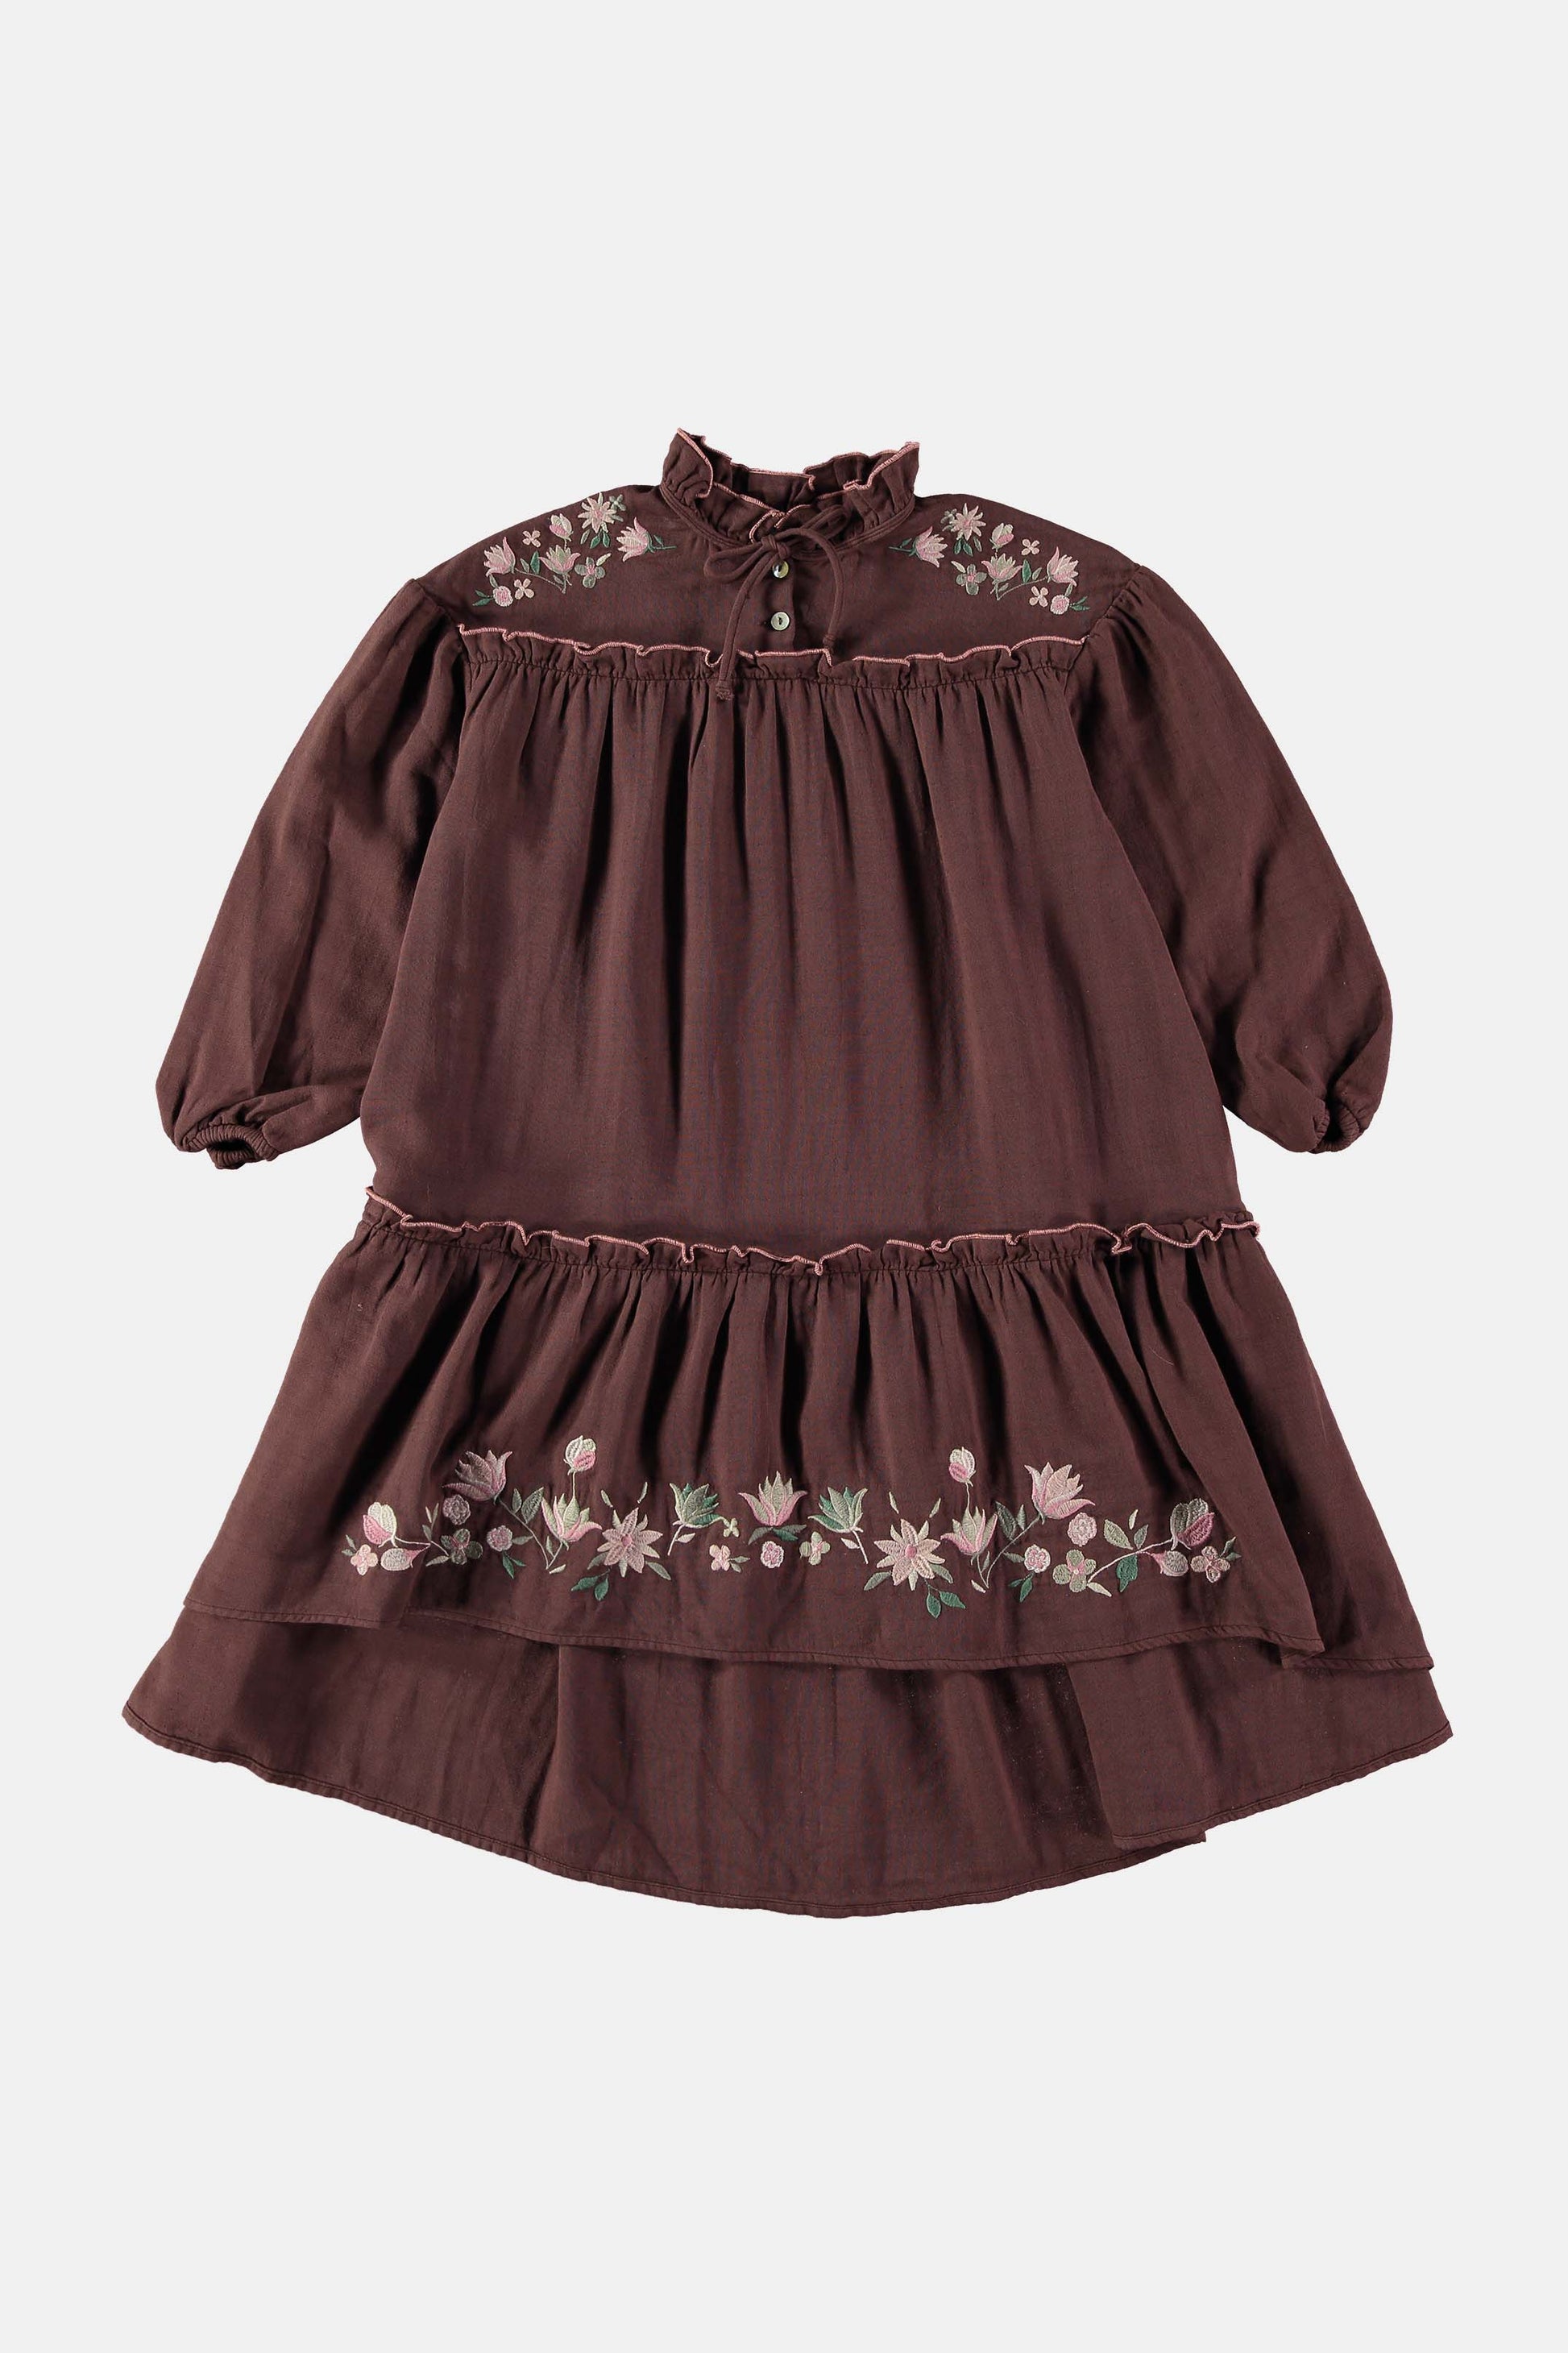 Coco Au Lait EMBROIDERED BROWN STONE DRESS  Brown Stone